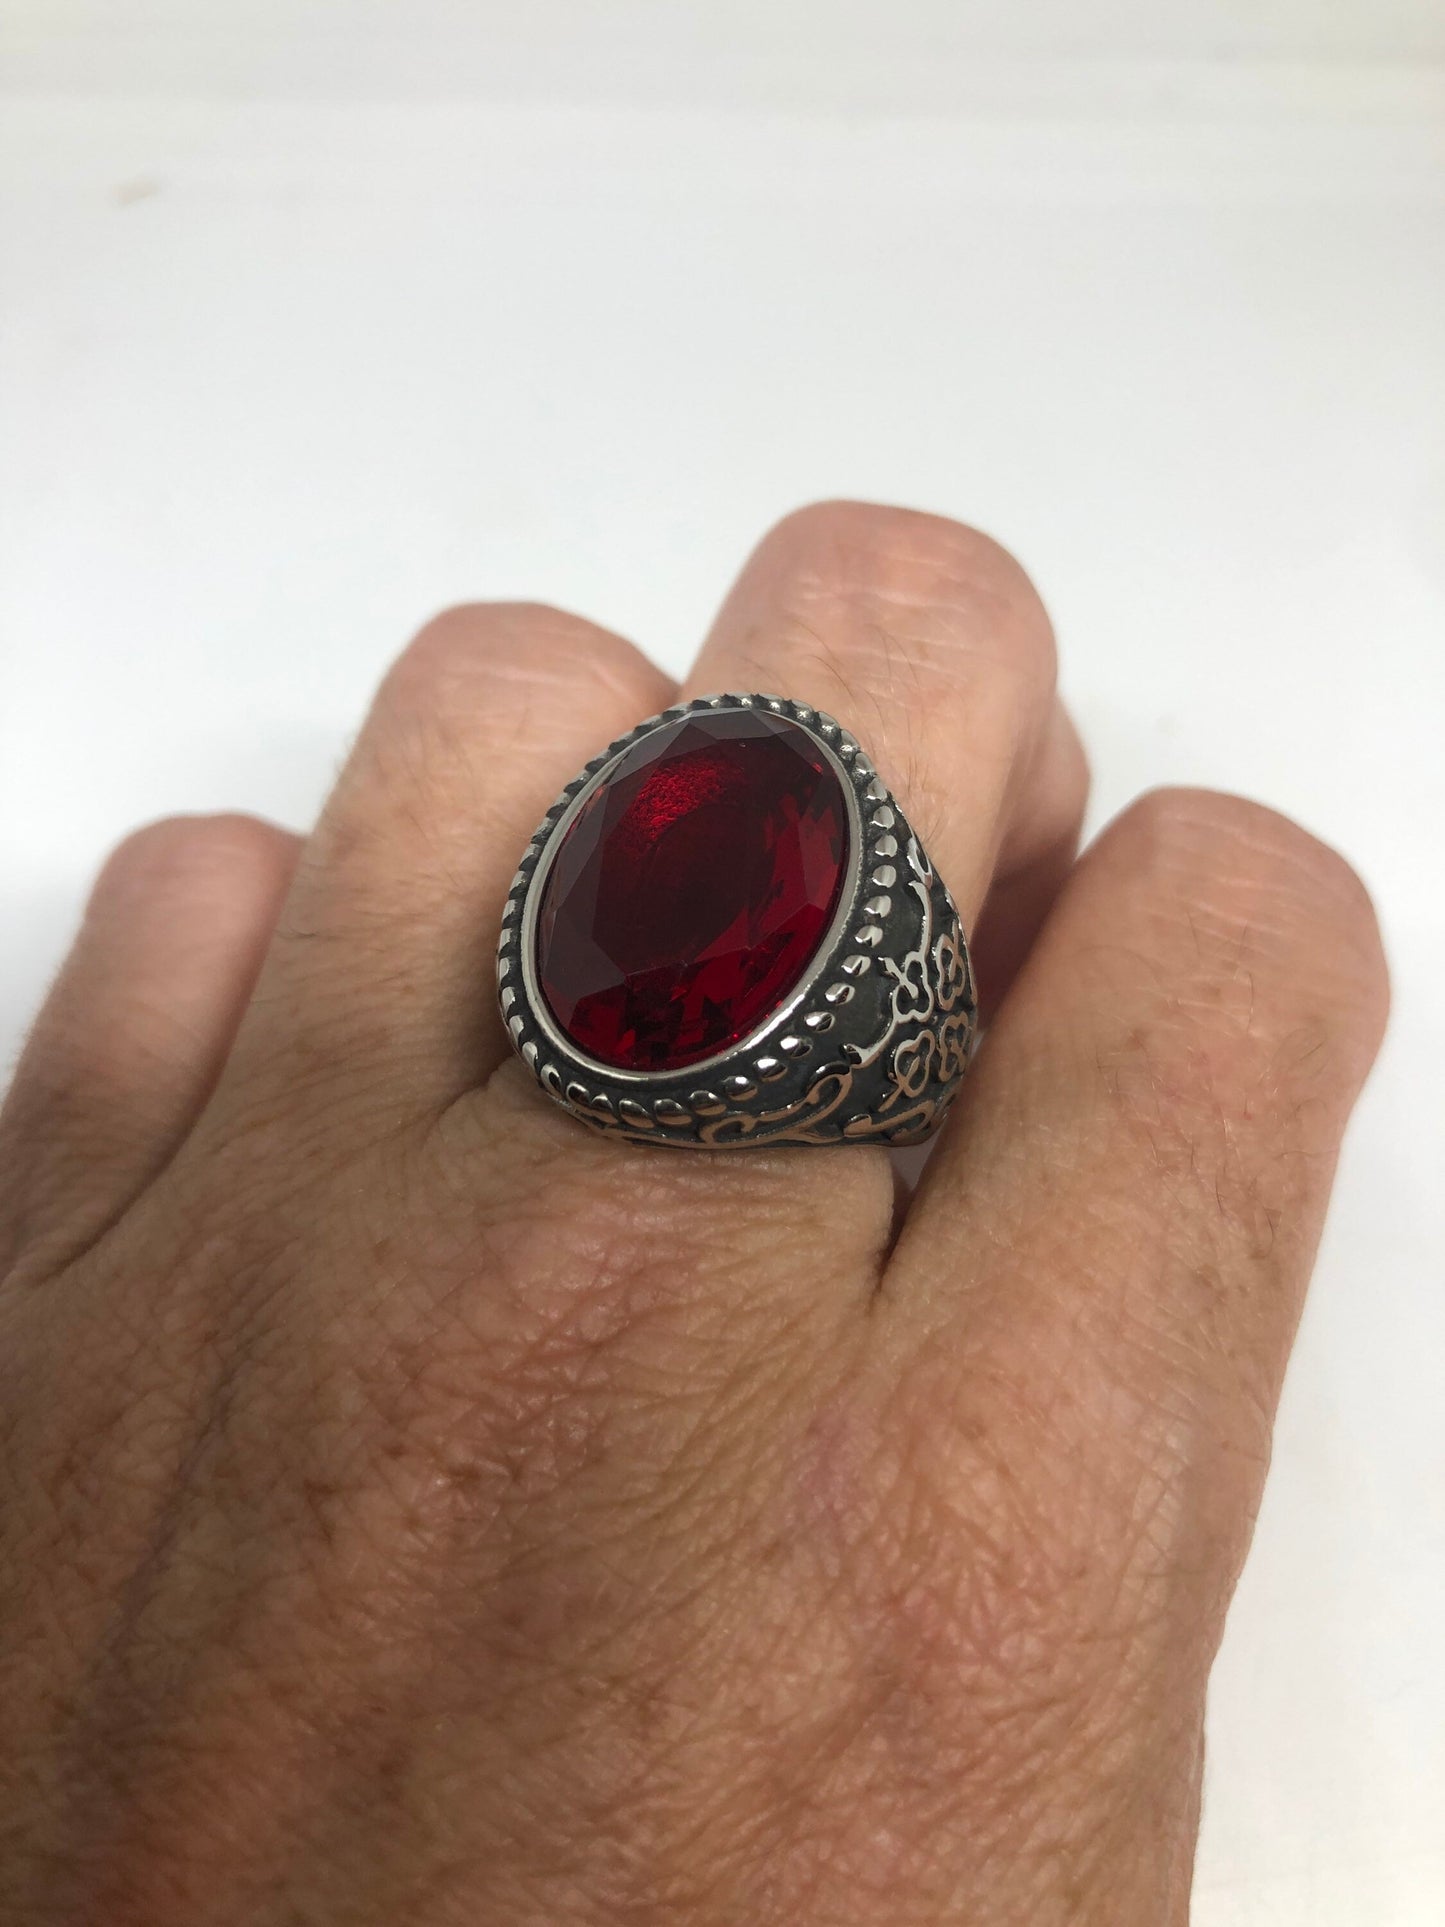 Vintage Red Ruby Glass Mens Ring Stainless Steel